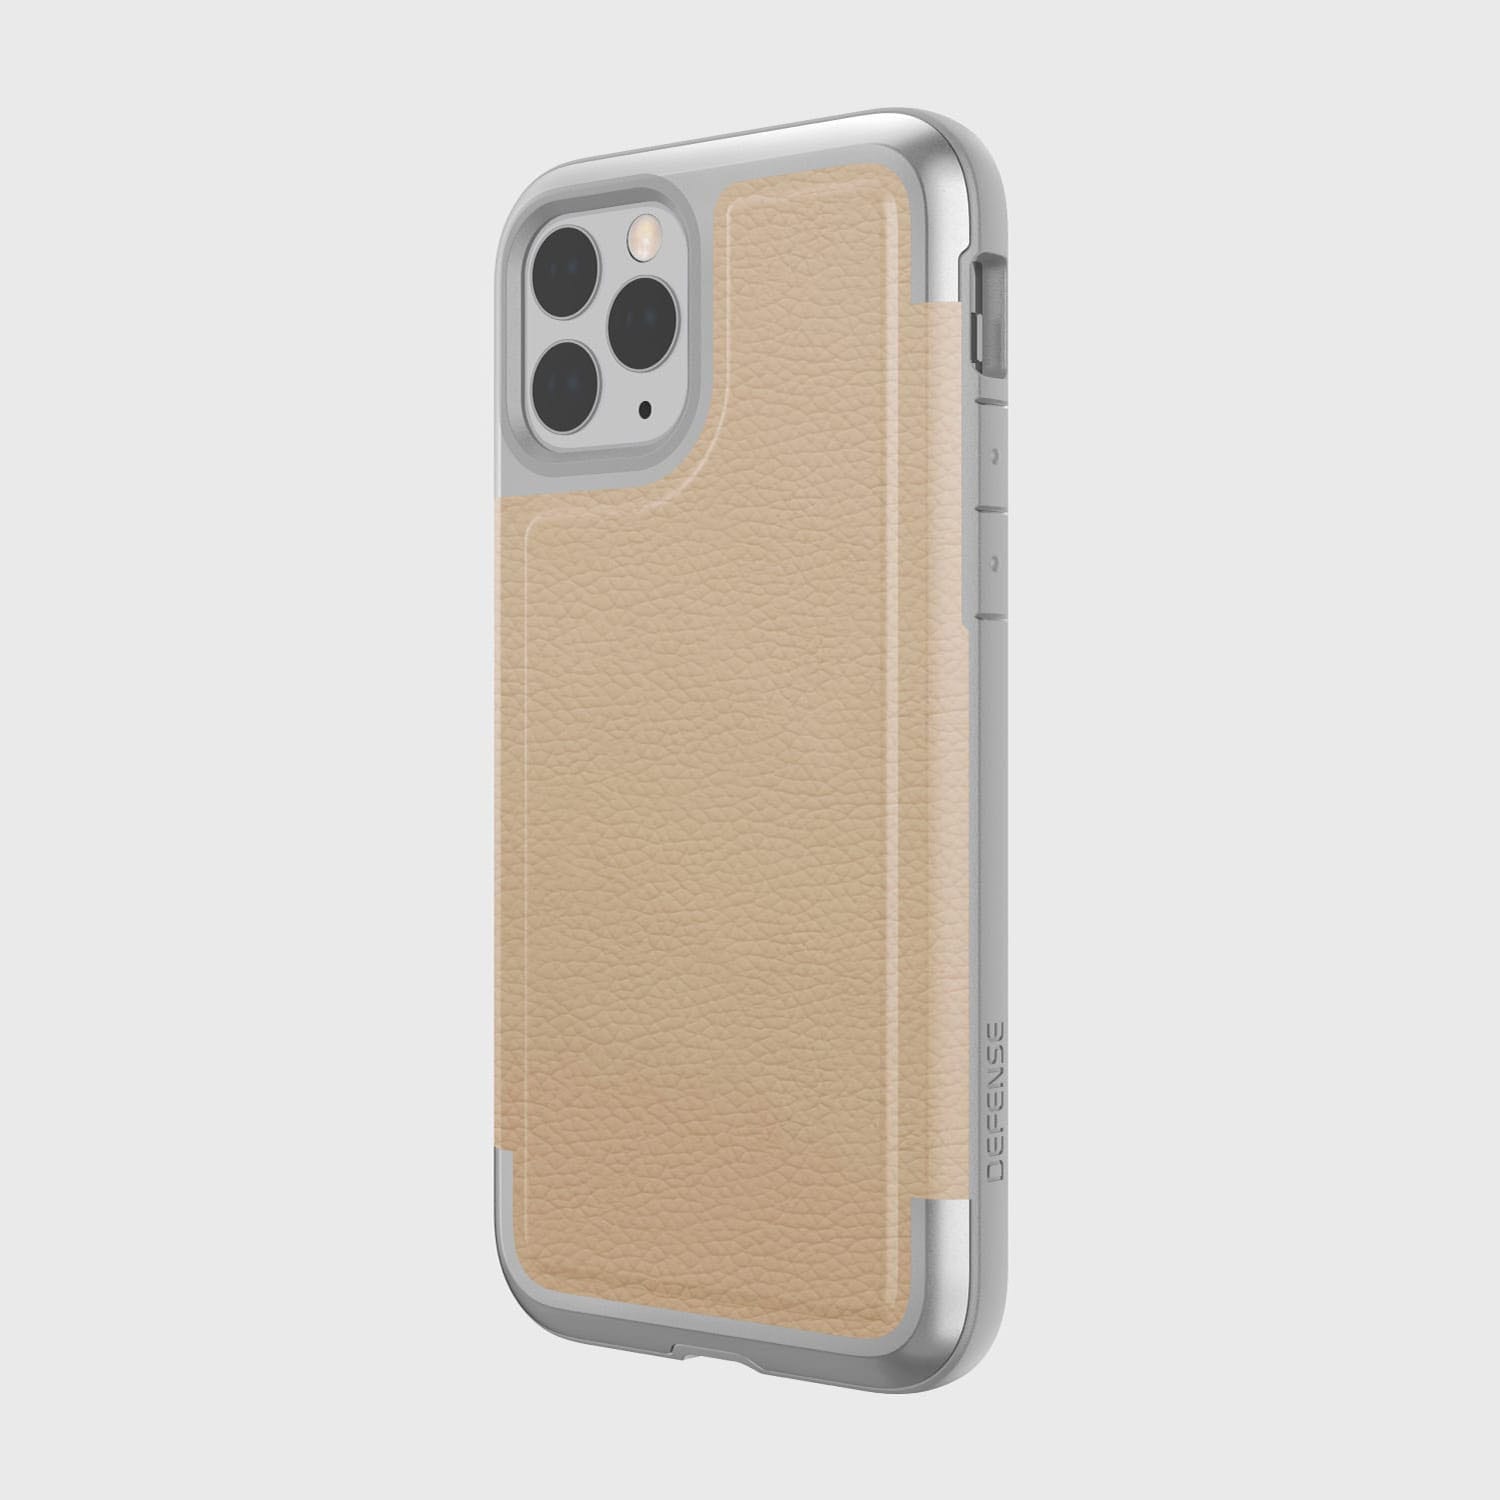 A protective beige leather Raptic case for the iPhone 11 Pro.